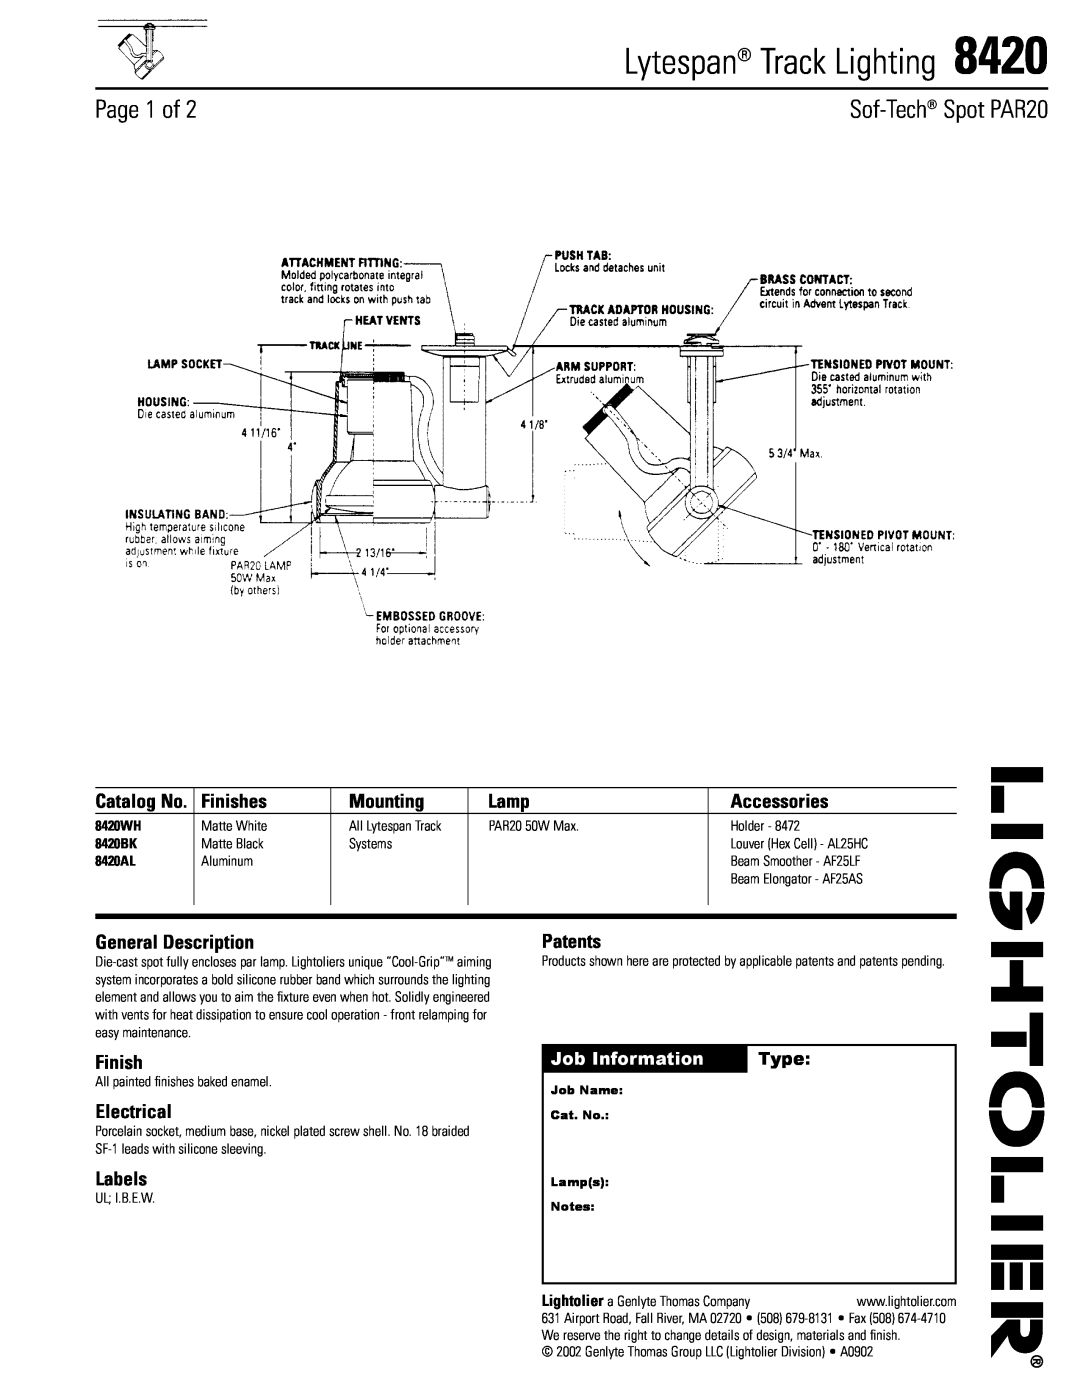 Lightolier 8420 manual Lytespan Track Lighting, Page 1 of, Sof-Tech Spot PAR20, Finishes, Mounting, Lamp, Accessories 